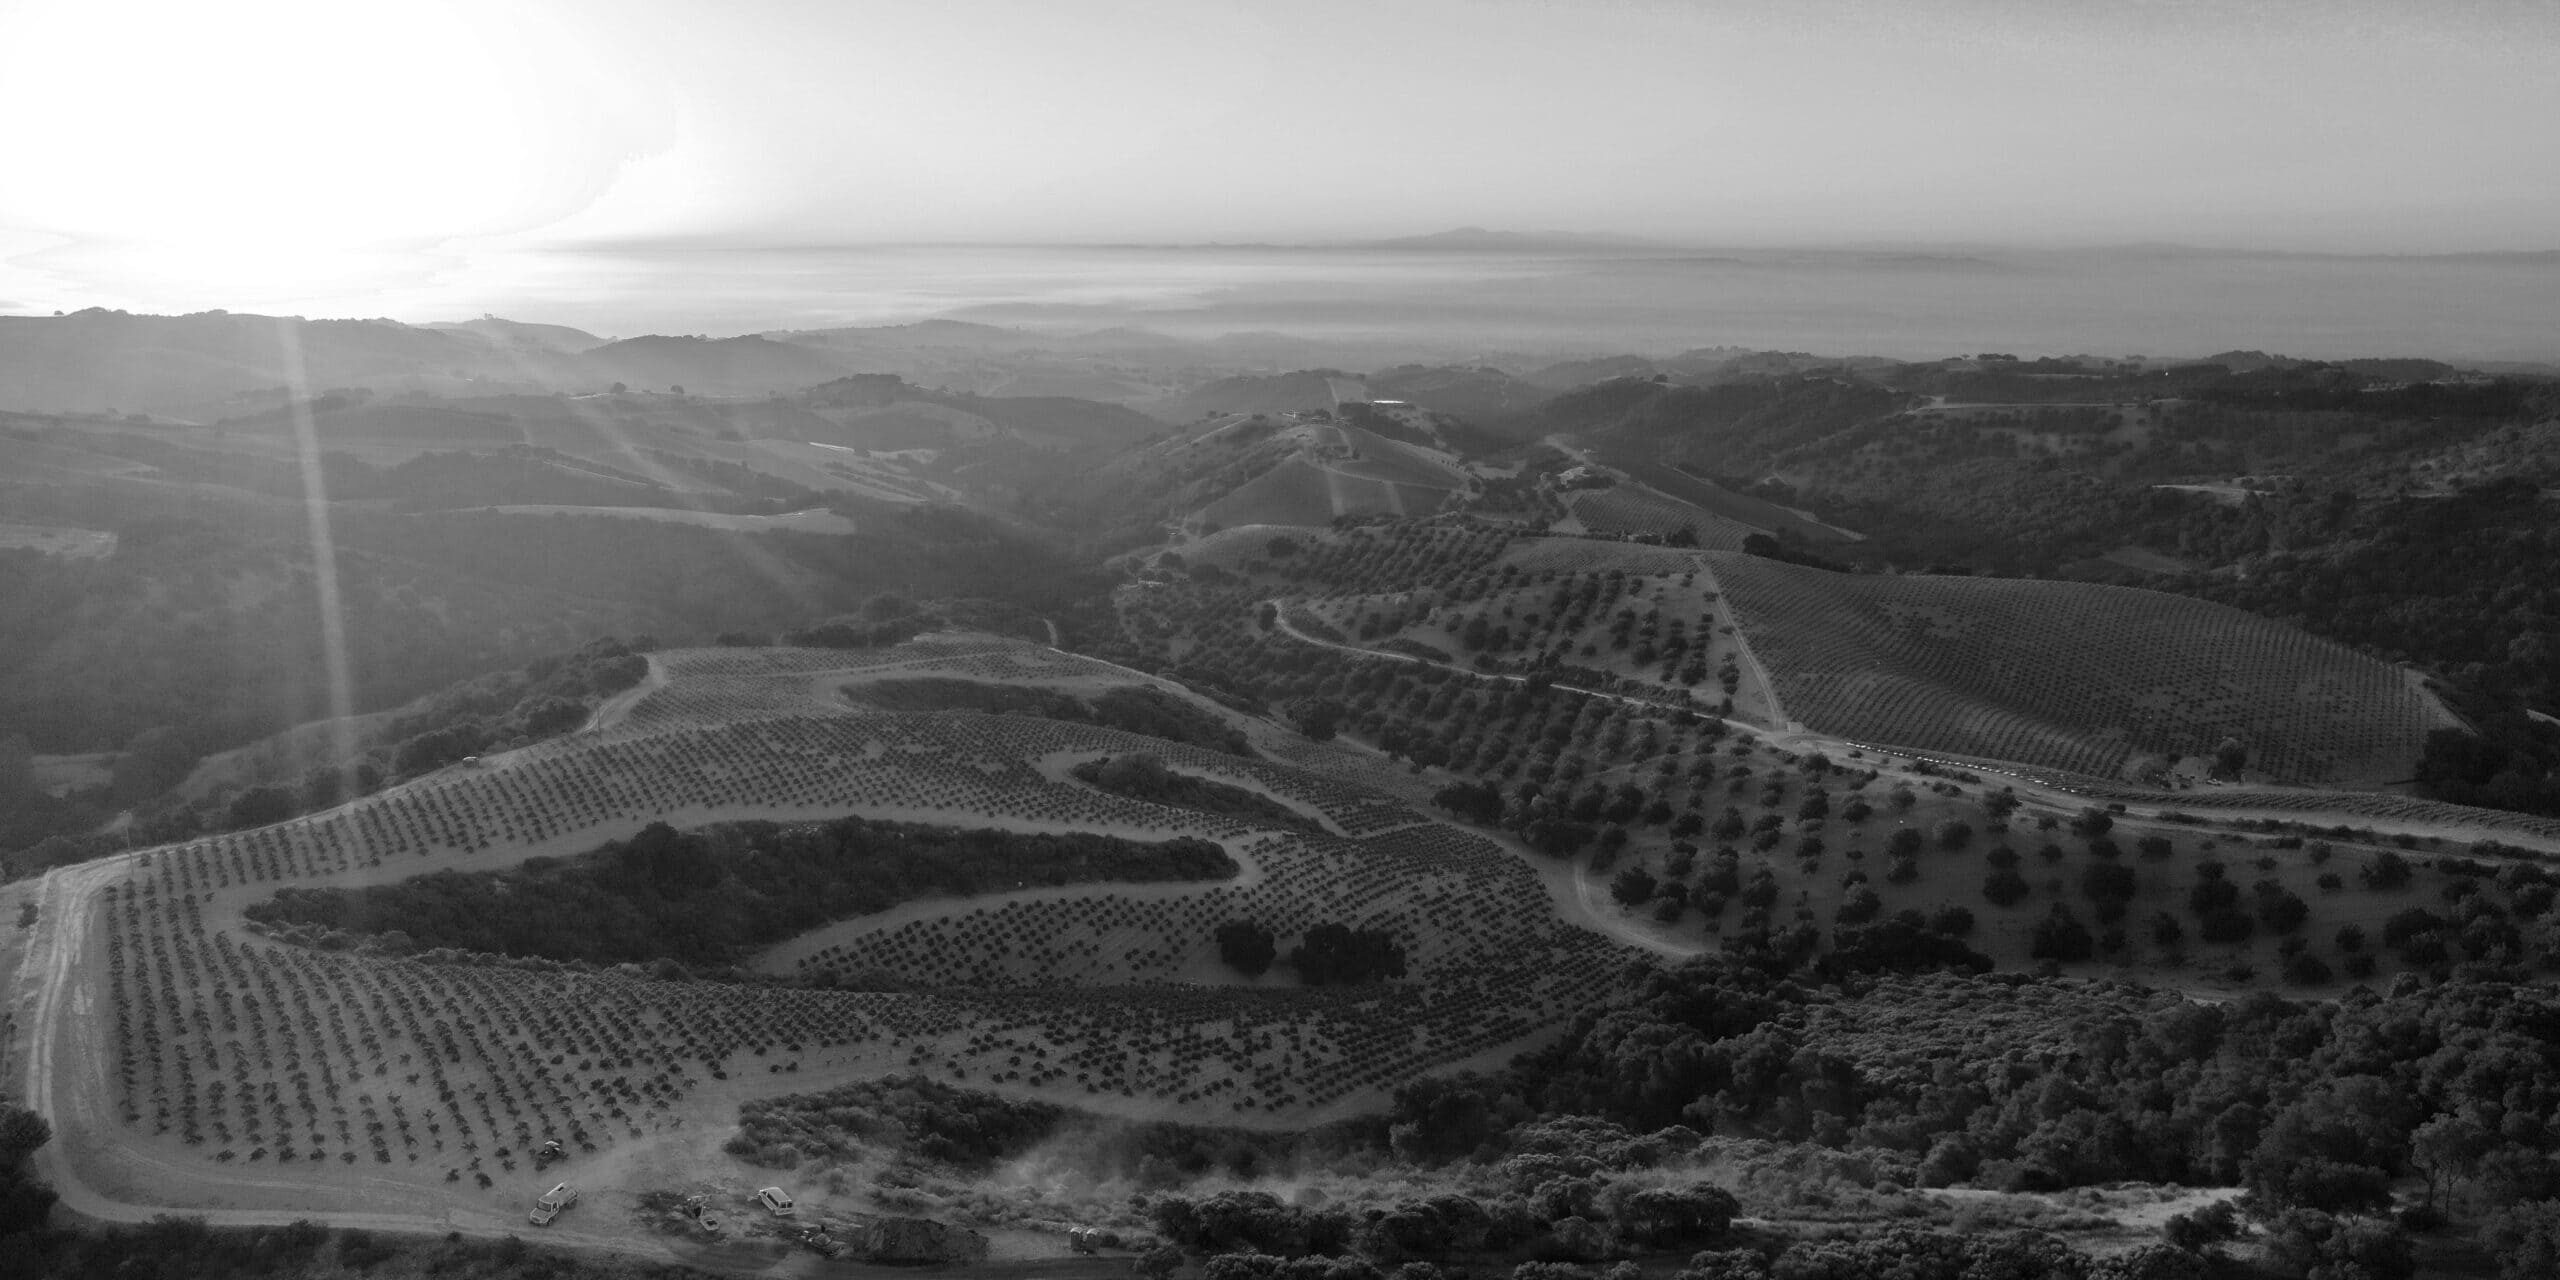 Overhead view of Paso Robles wineries in black and white